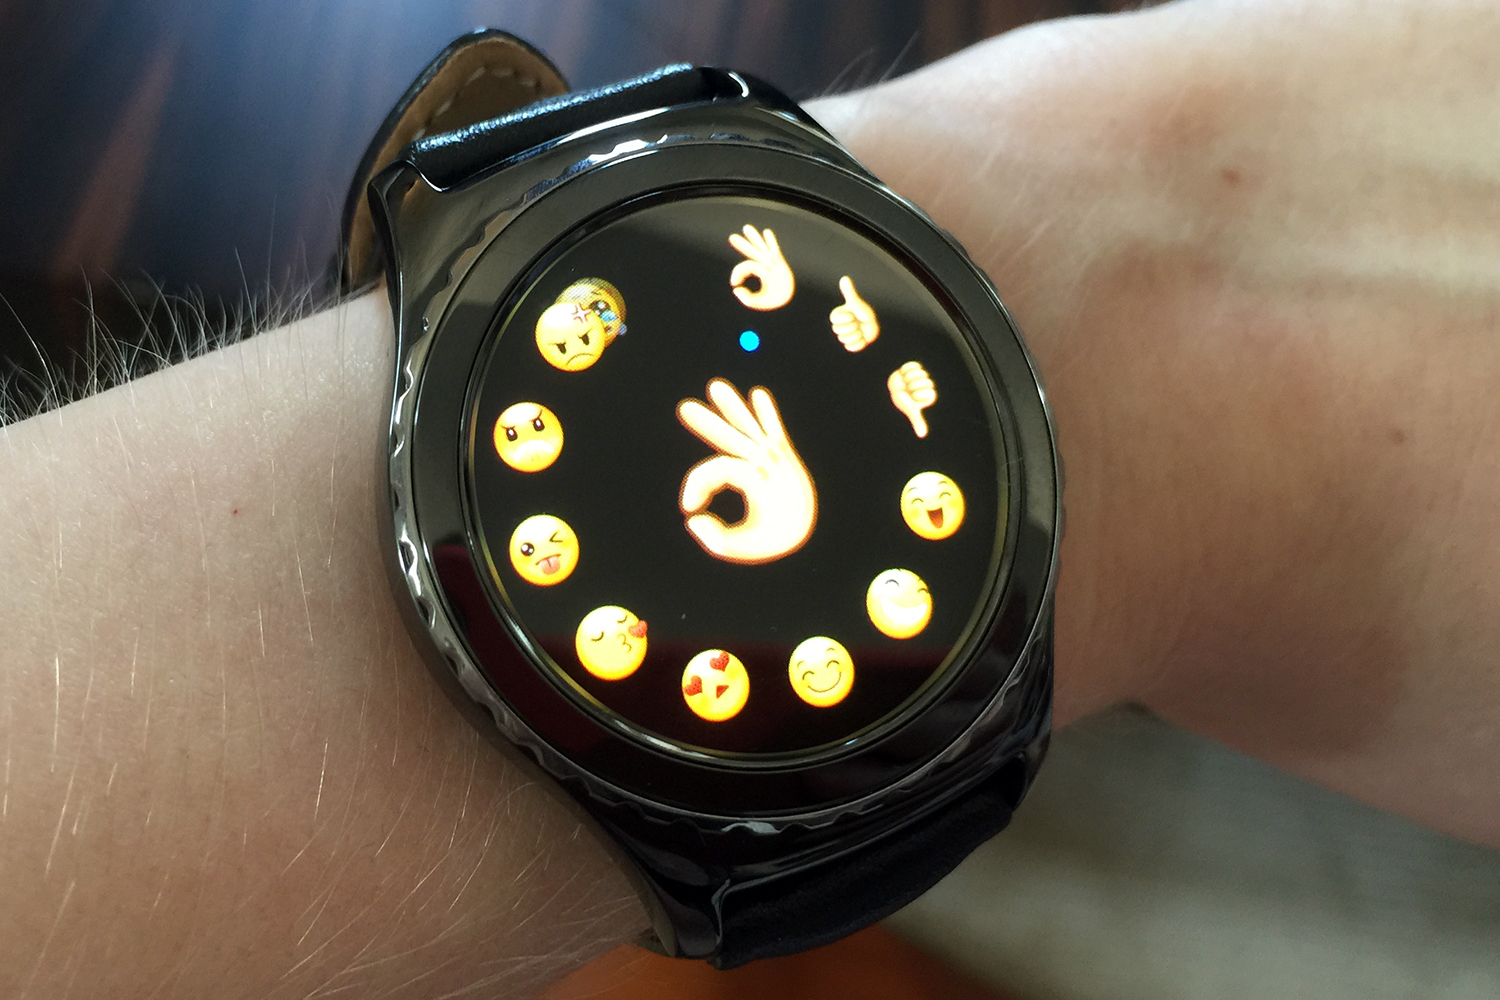 samsung gear s2 hands on classic 5347